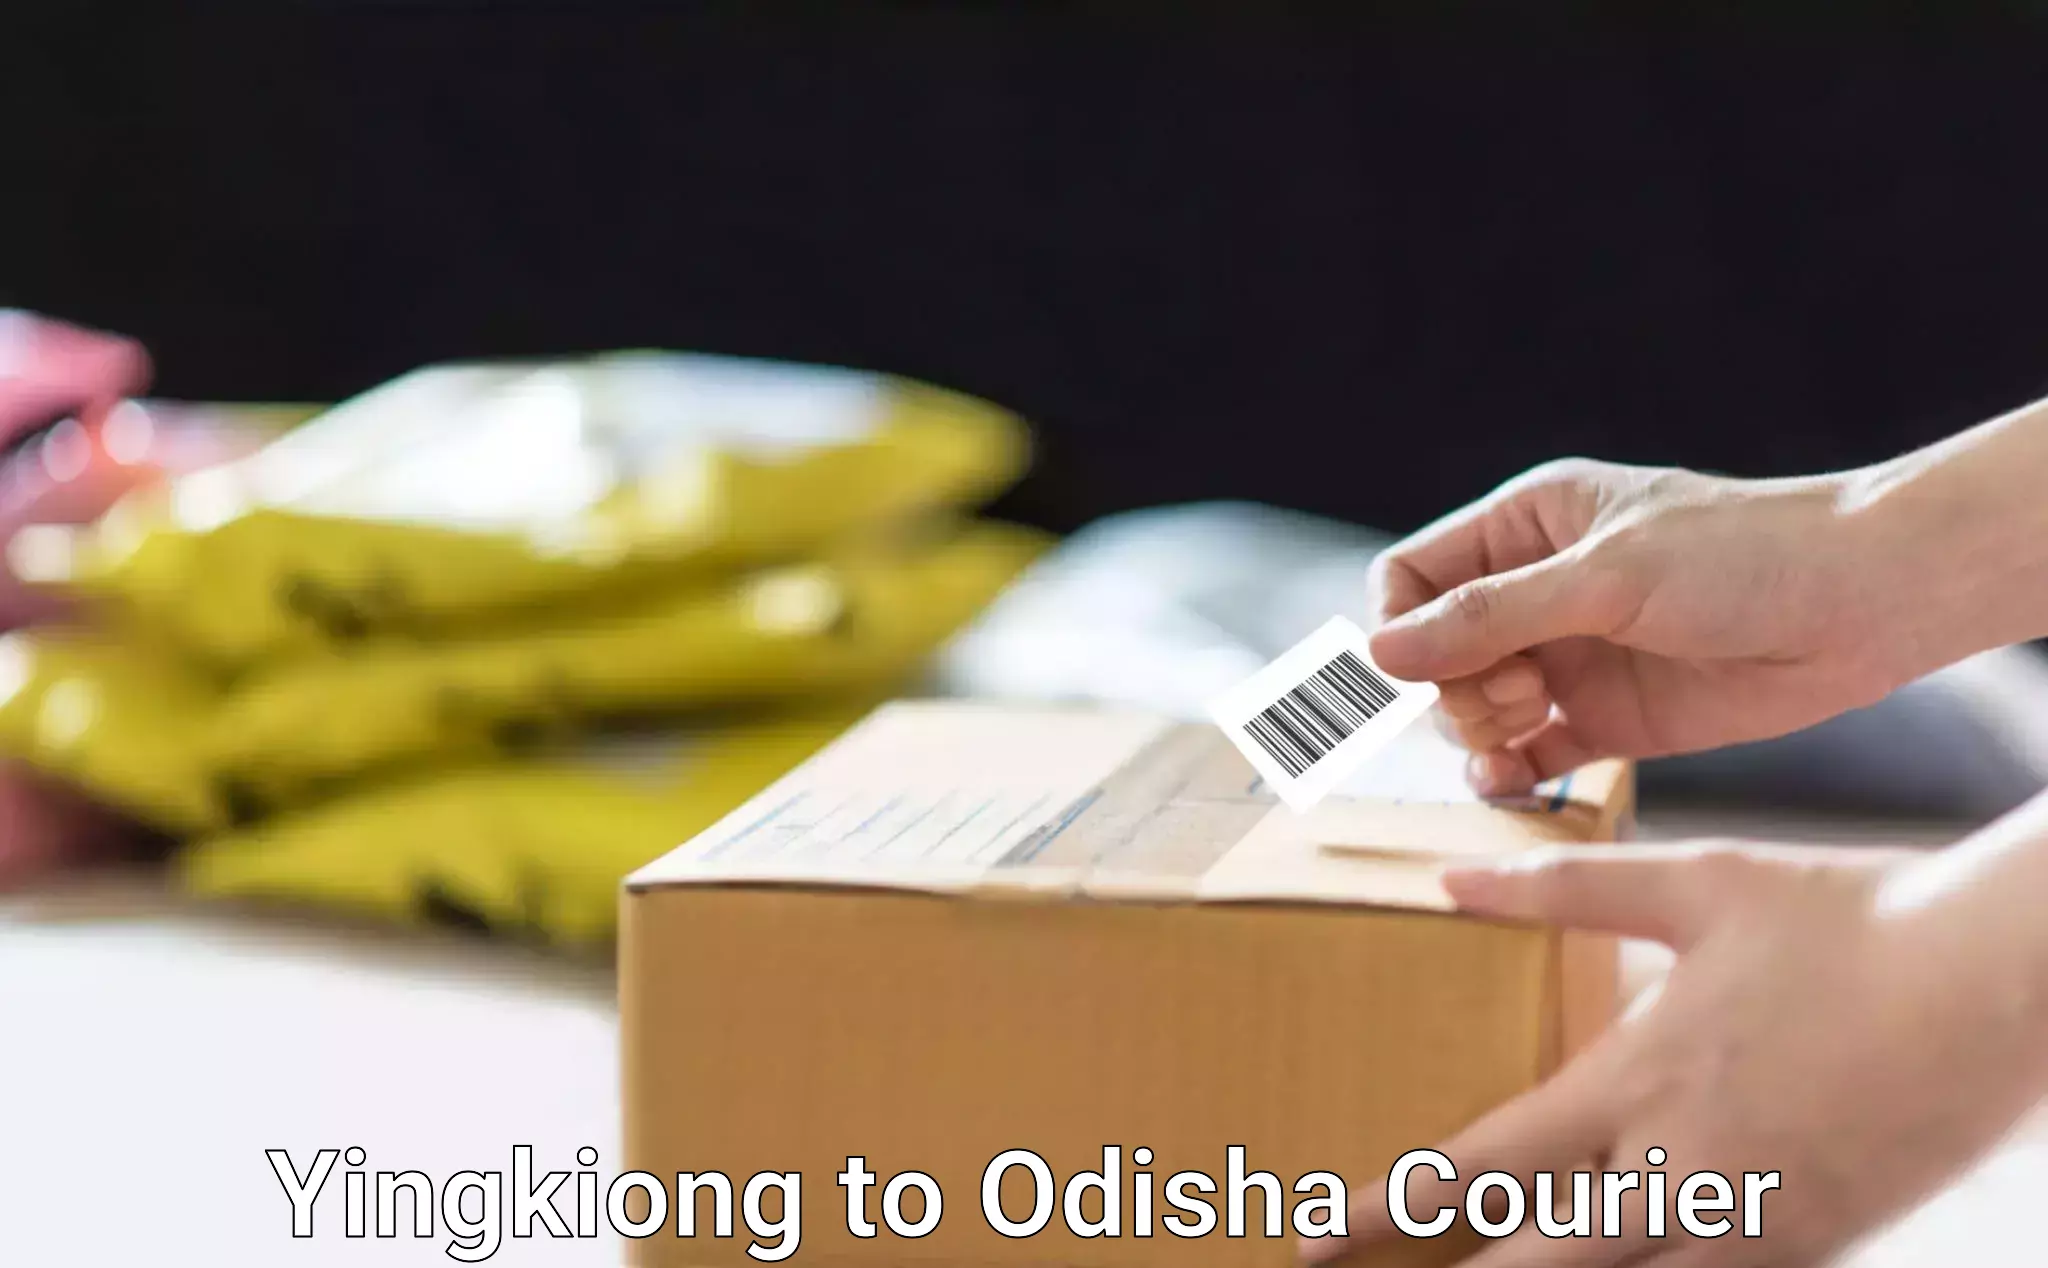 Sustainable courier practices Yingkiong to Odisha